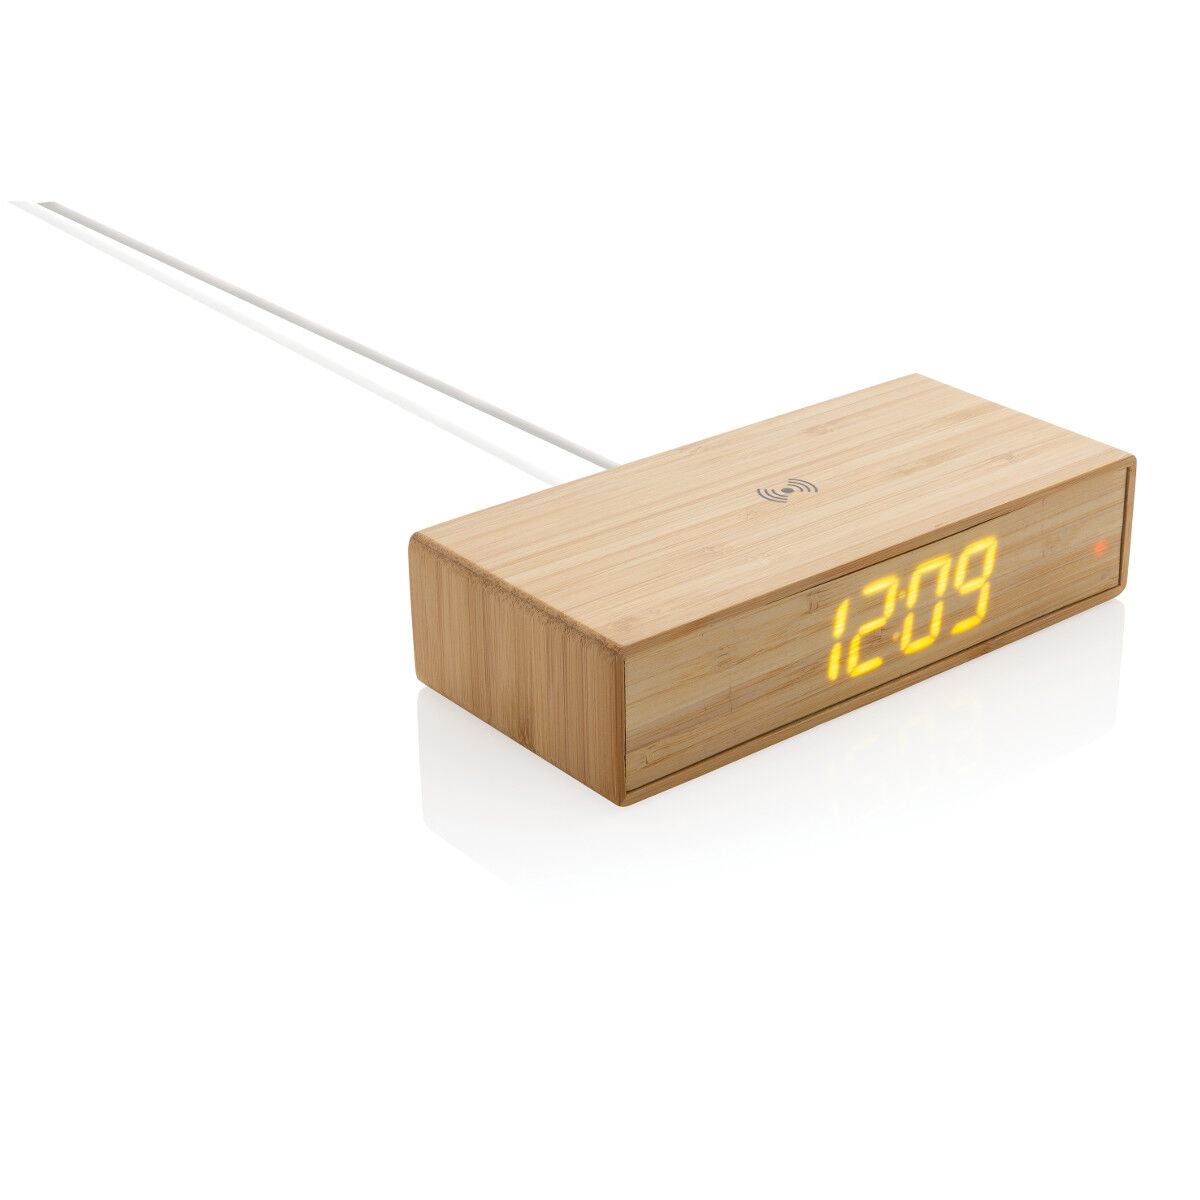 Bamboo alarm clock with wireless charger